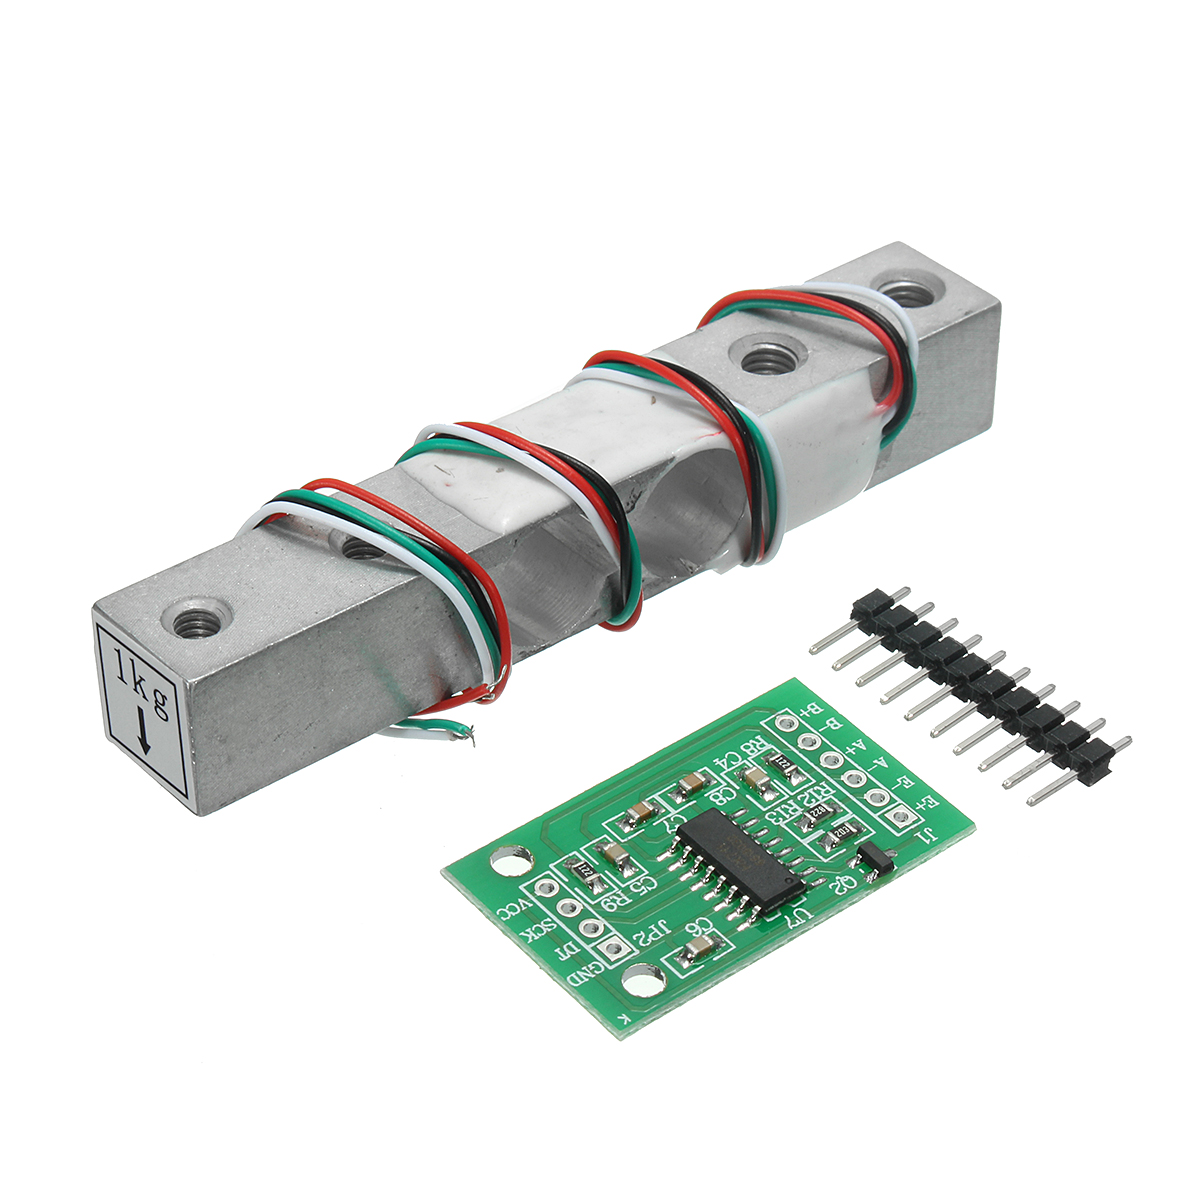 

5pcs HX711 24bit AD Module + 1kg Aluminum Alloy Scale Weighing Sensor Load Cell Kit For Arduino